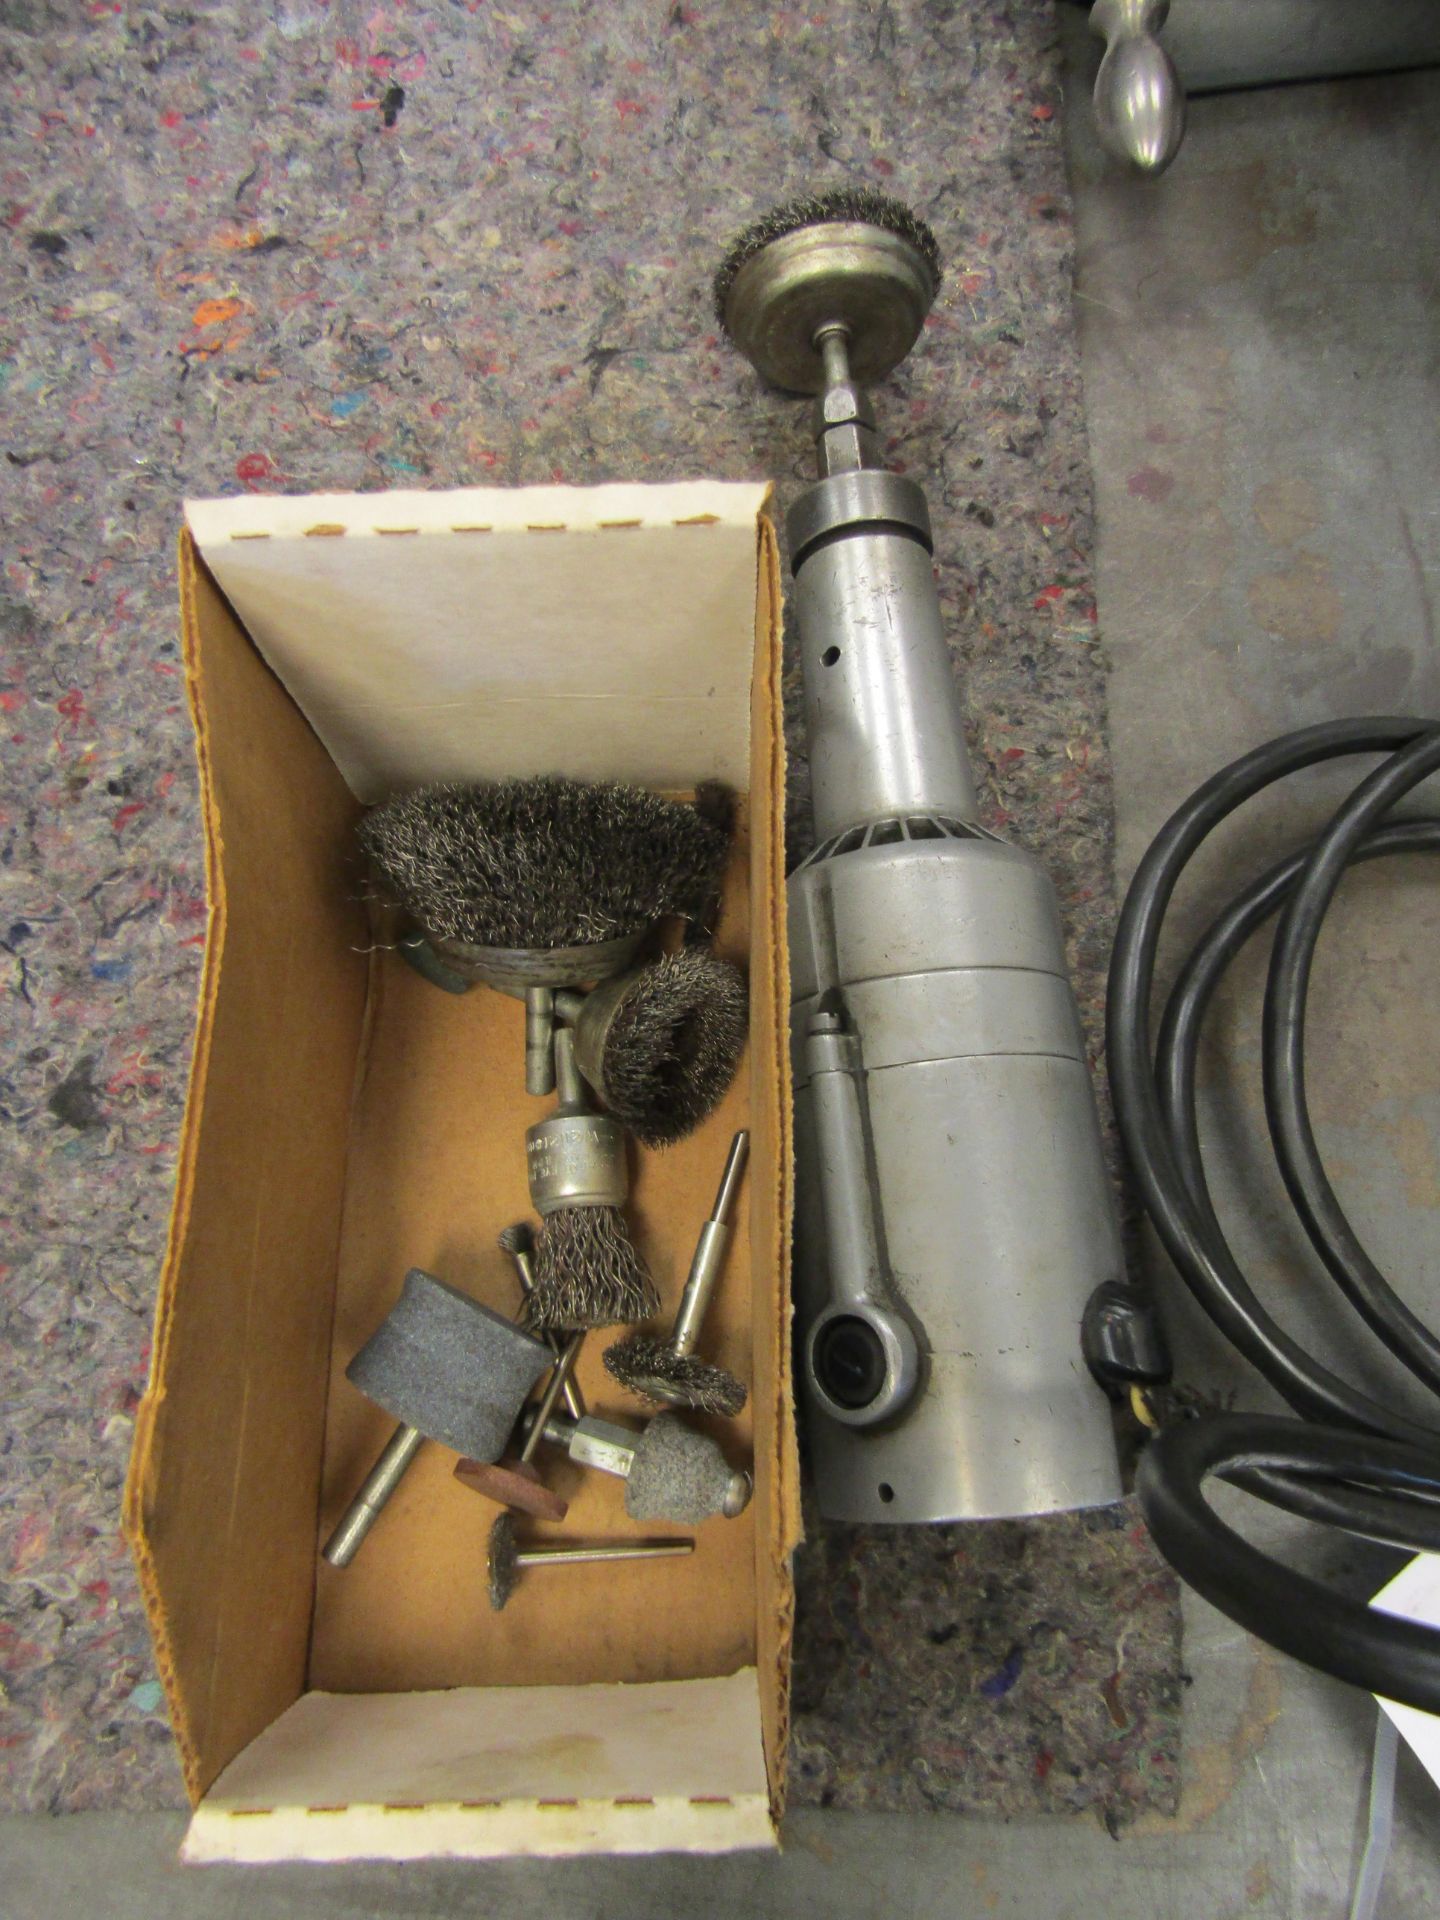 CRAFTSMAN HAND GRINDER, MODEL 315-25840, WITH SPARE TURNING BRUSHES - Image 2 of 3